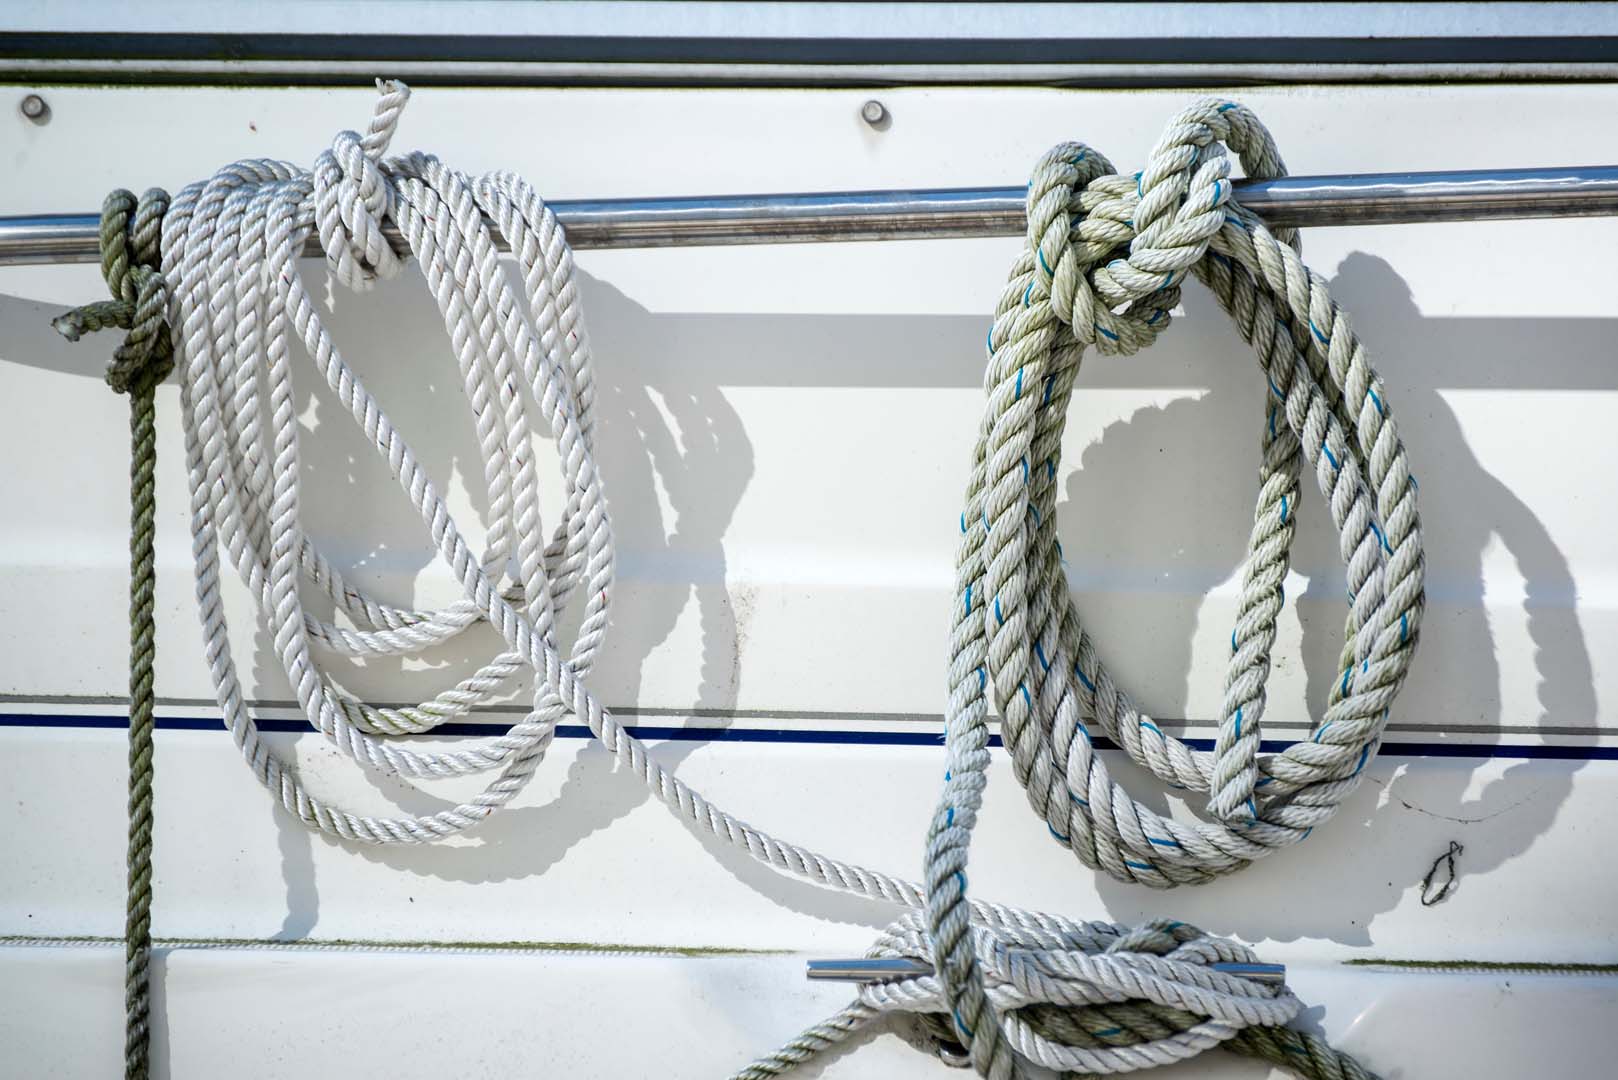 wirtschaftsstrafrecht Detail image of ropes and cleats on yacht sailboat